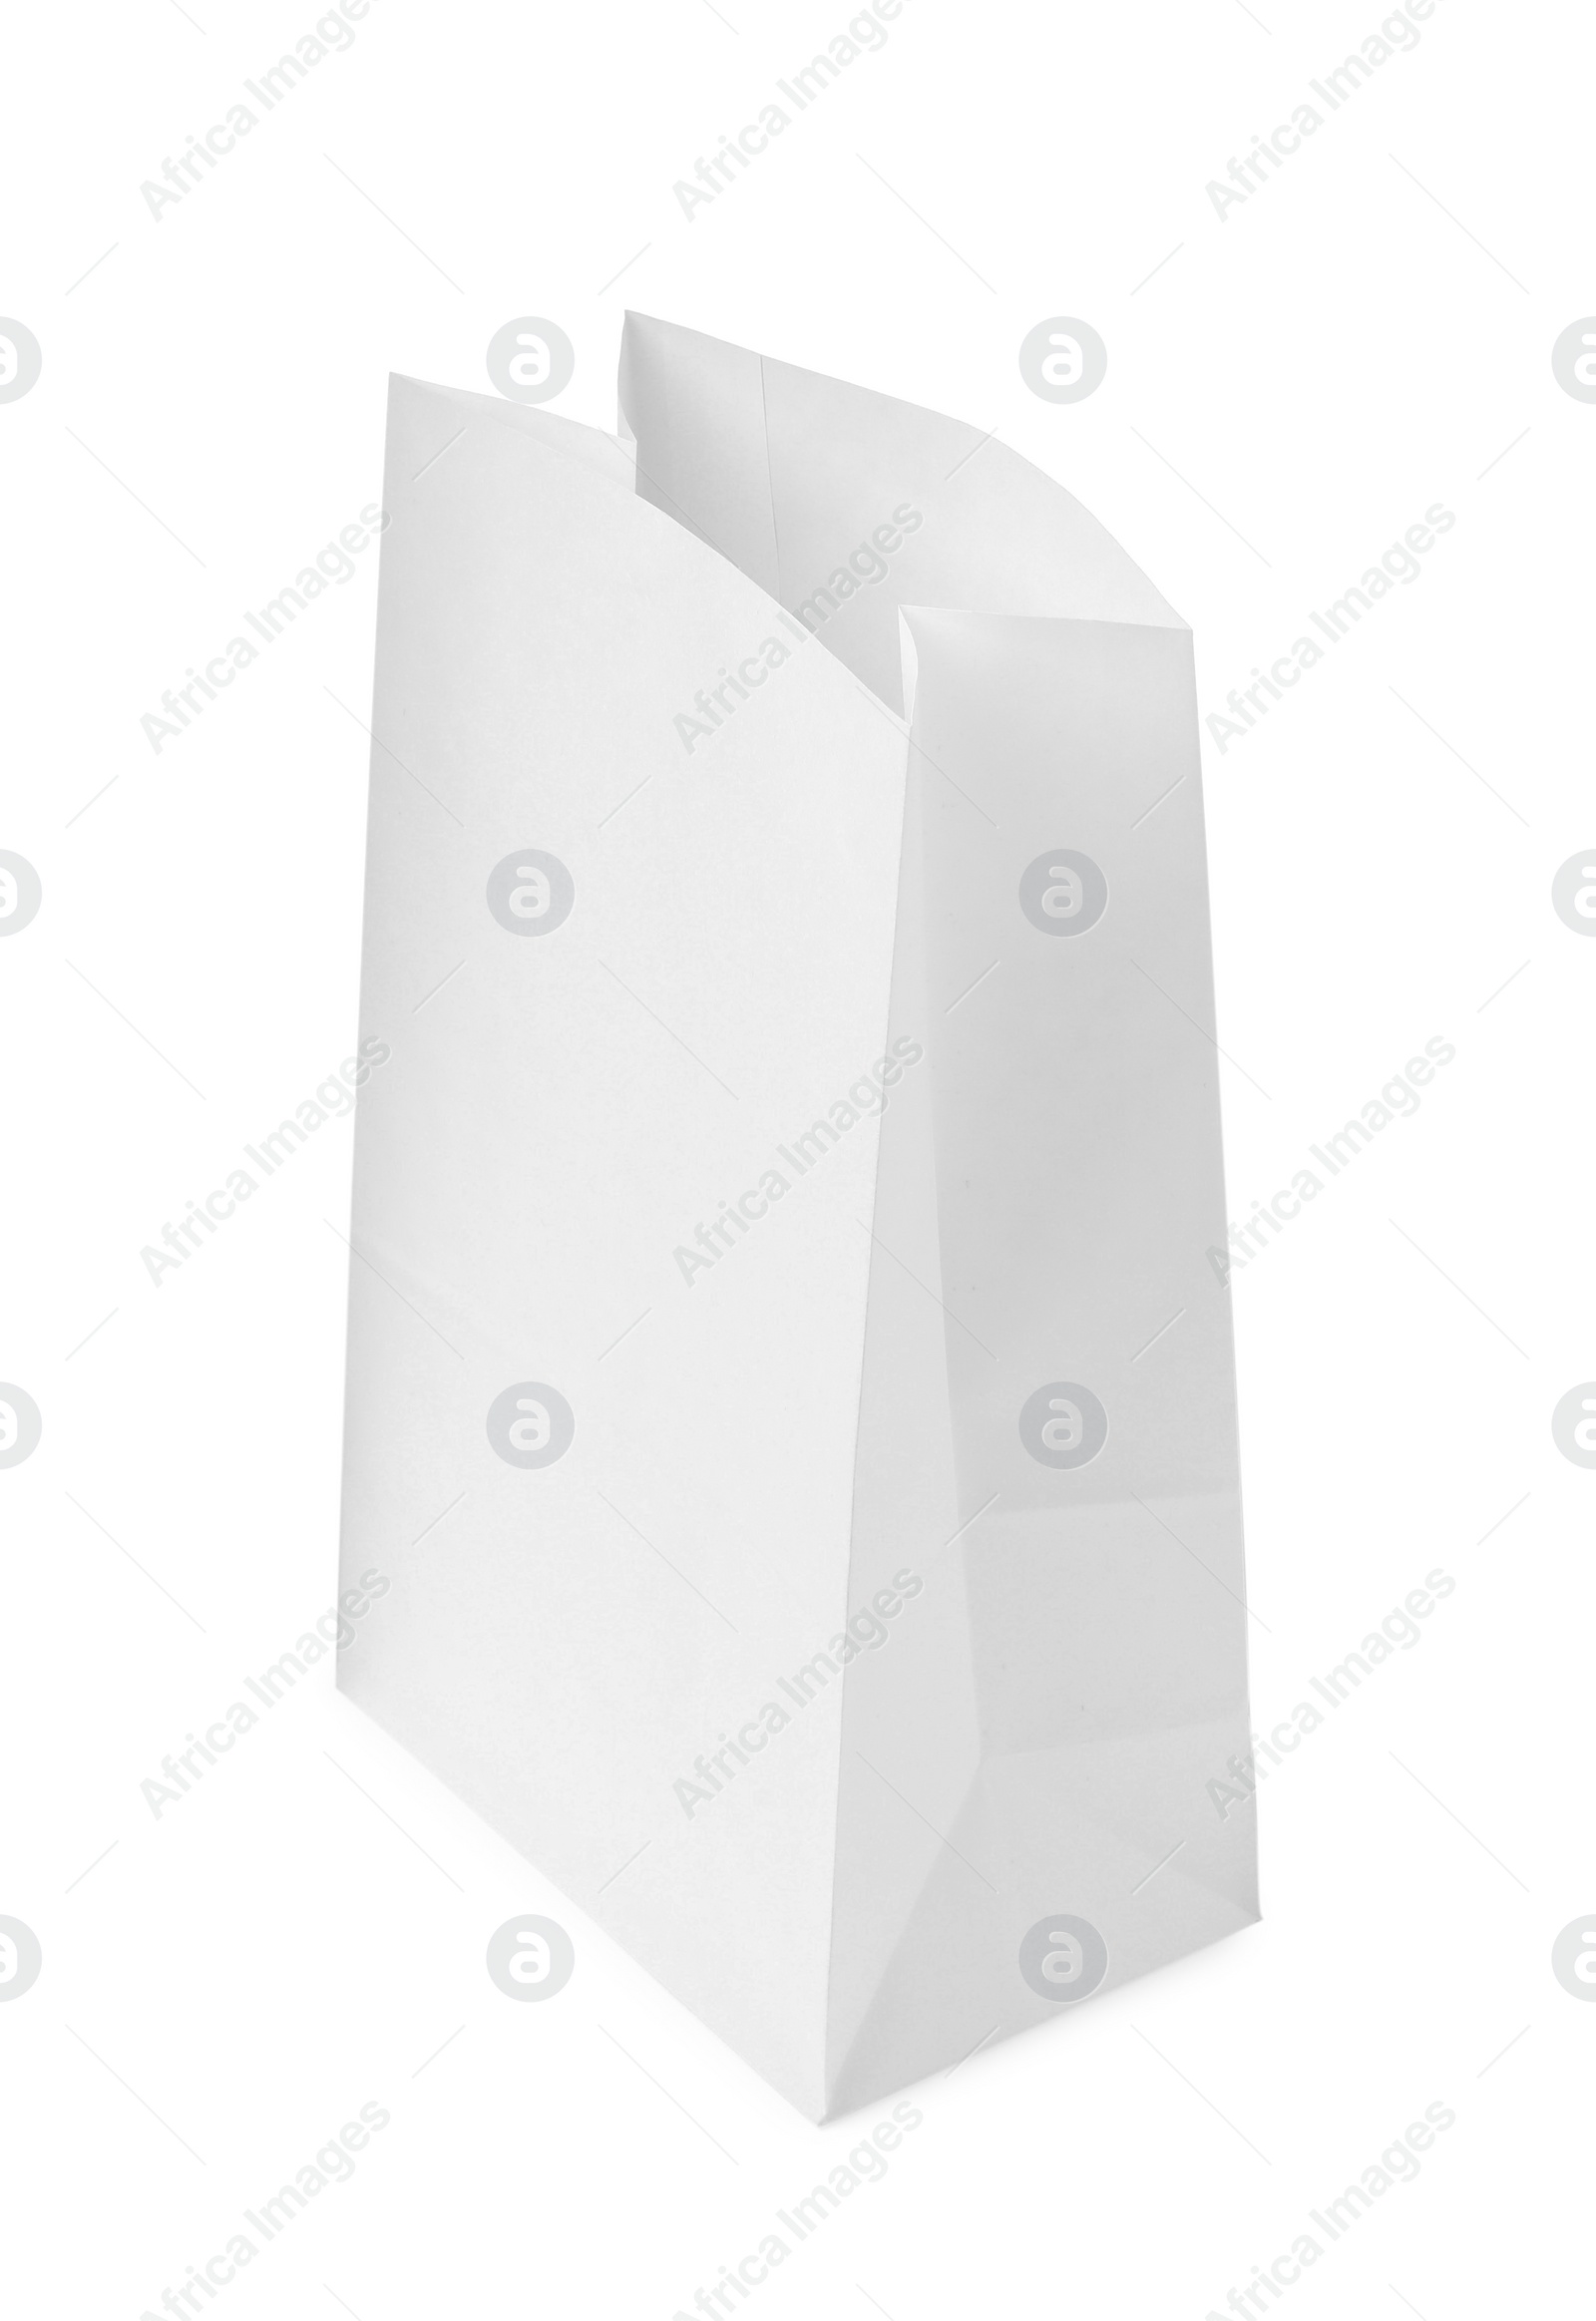 Photo of New open paper bag isolated on white